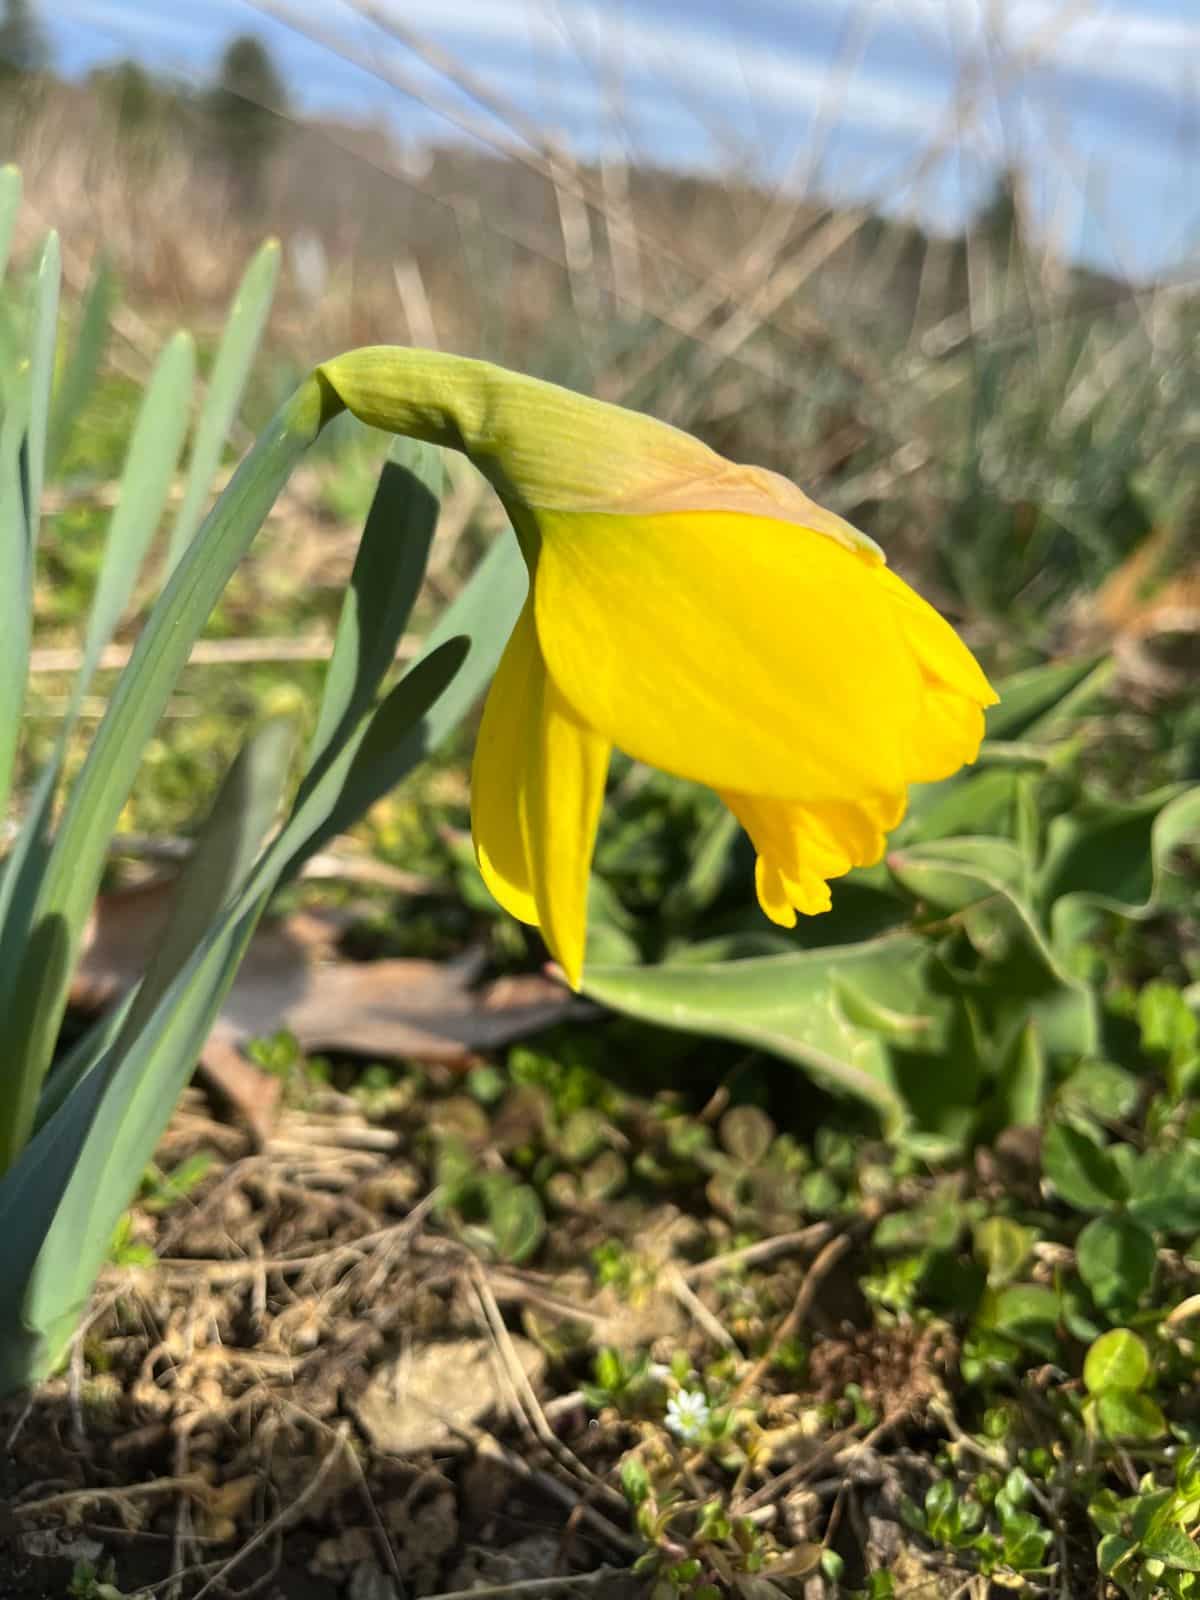 A daffodil budding in the spring